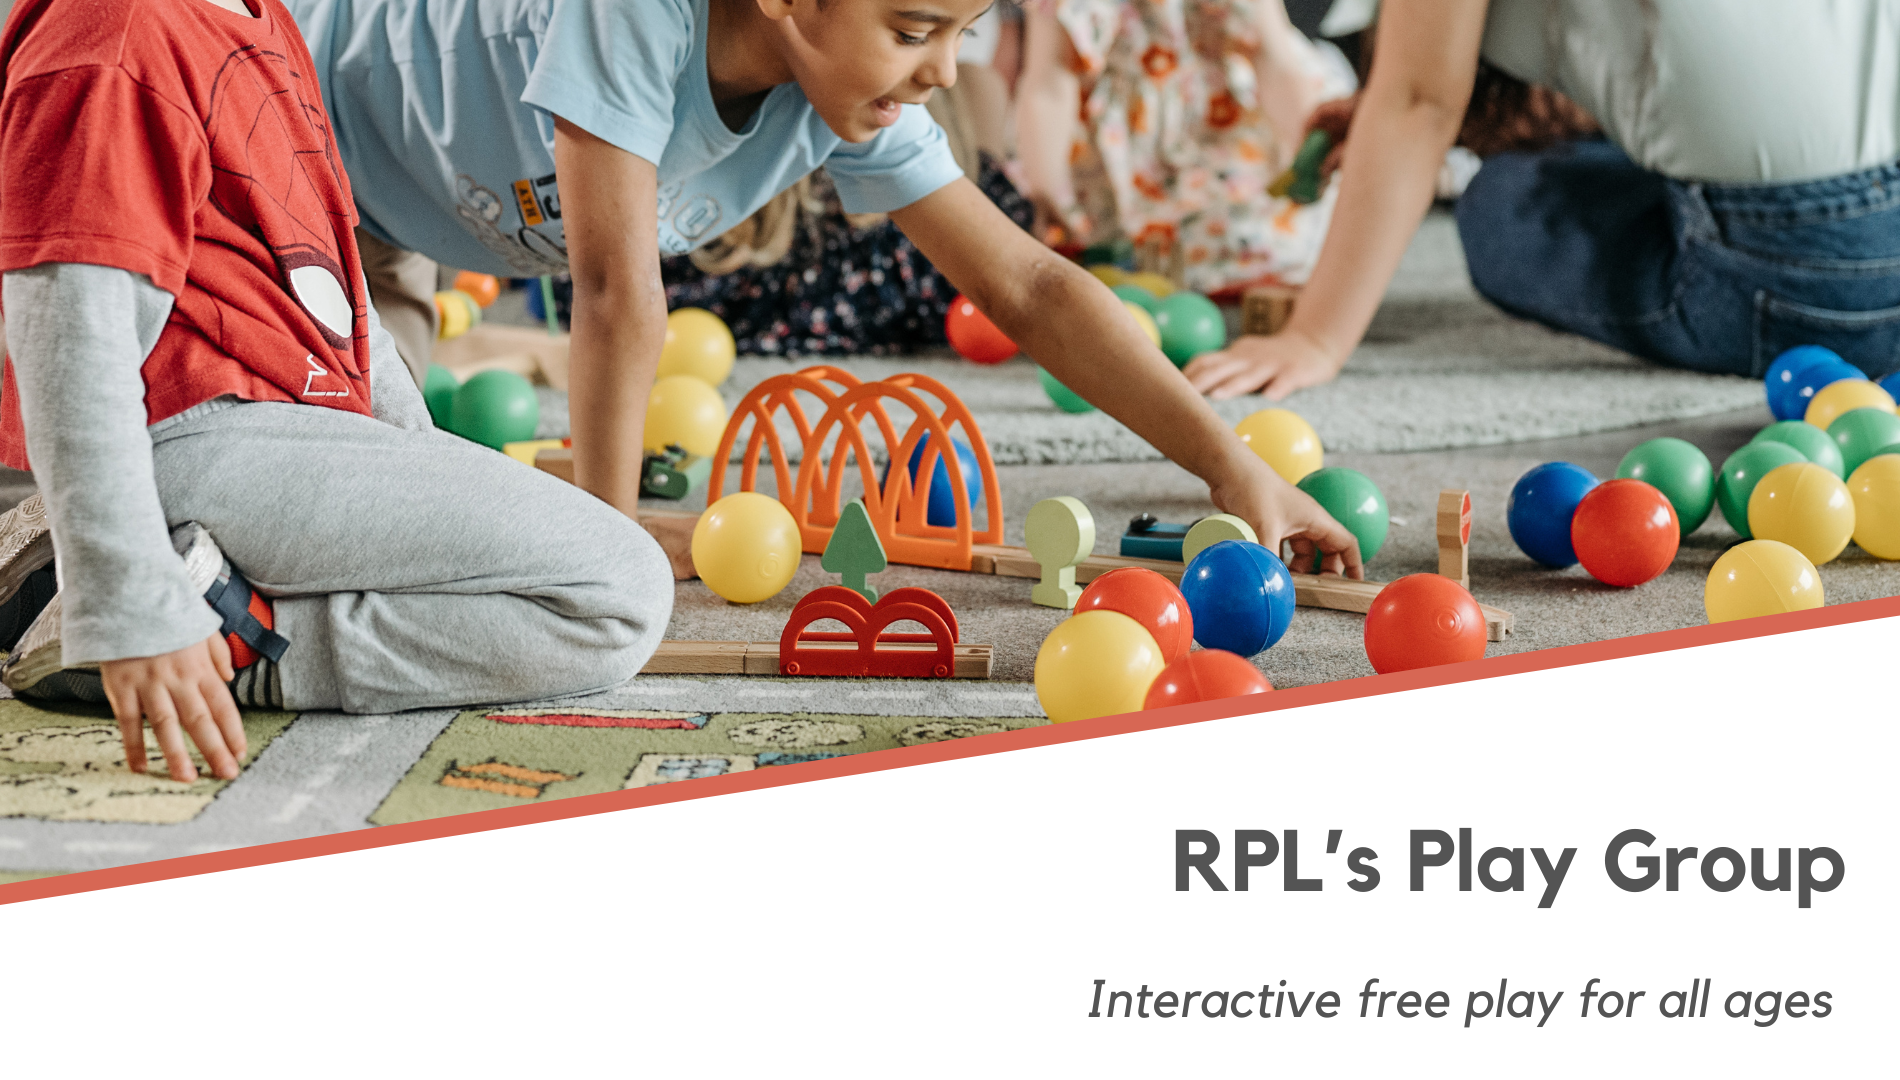 RPL's Play Group is for all ages!